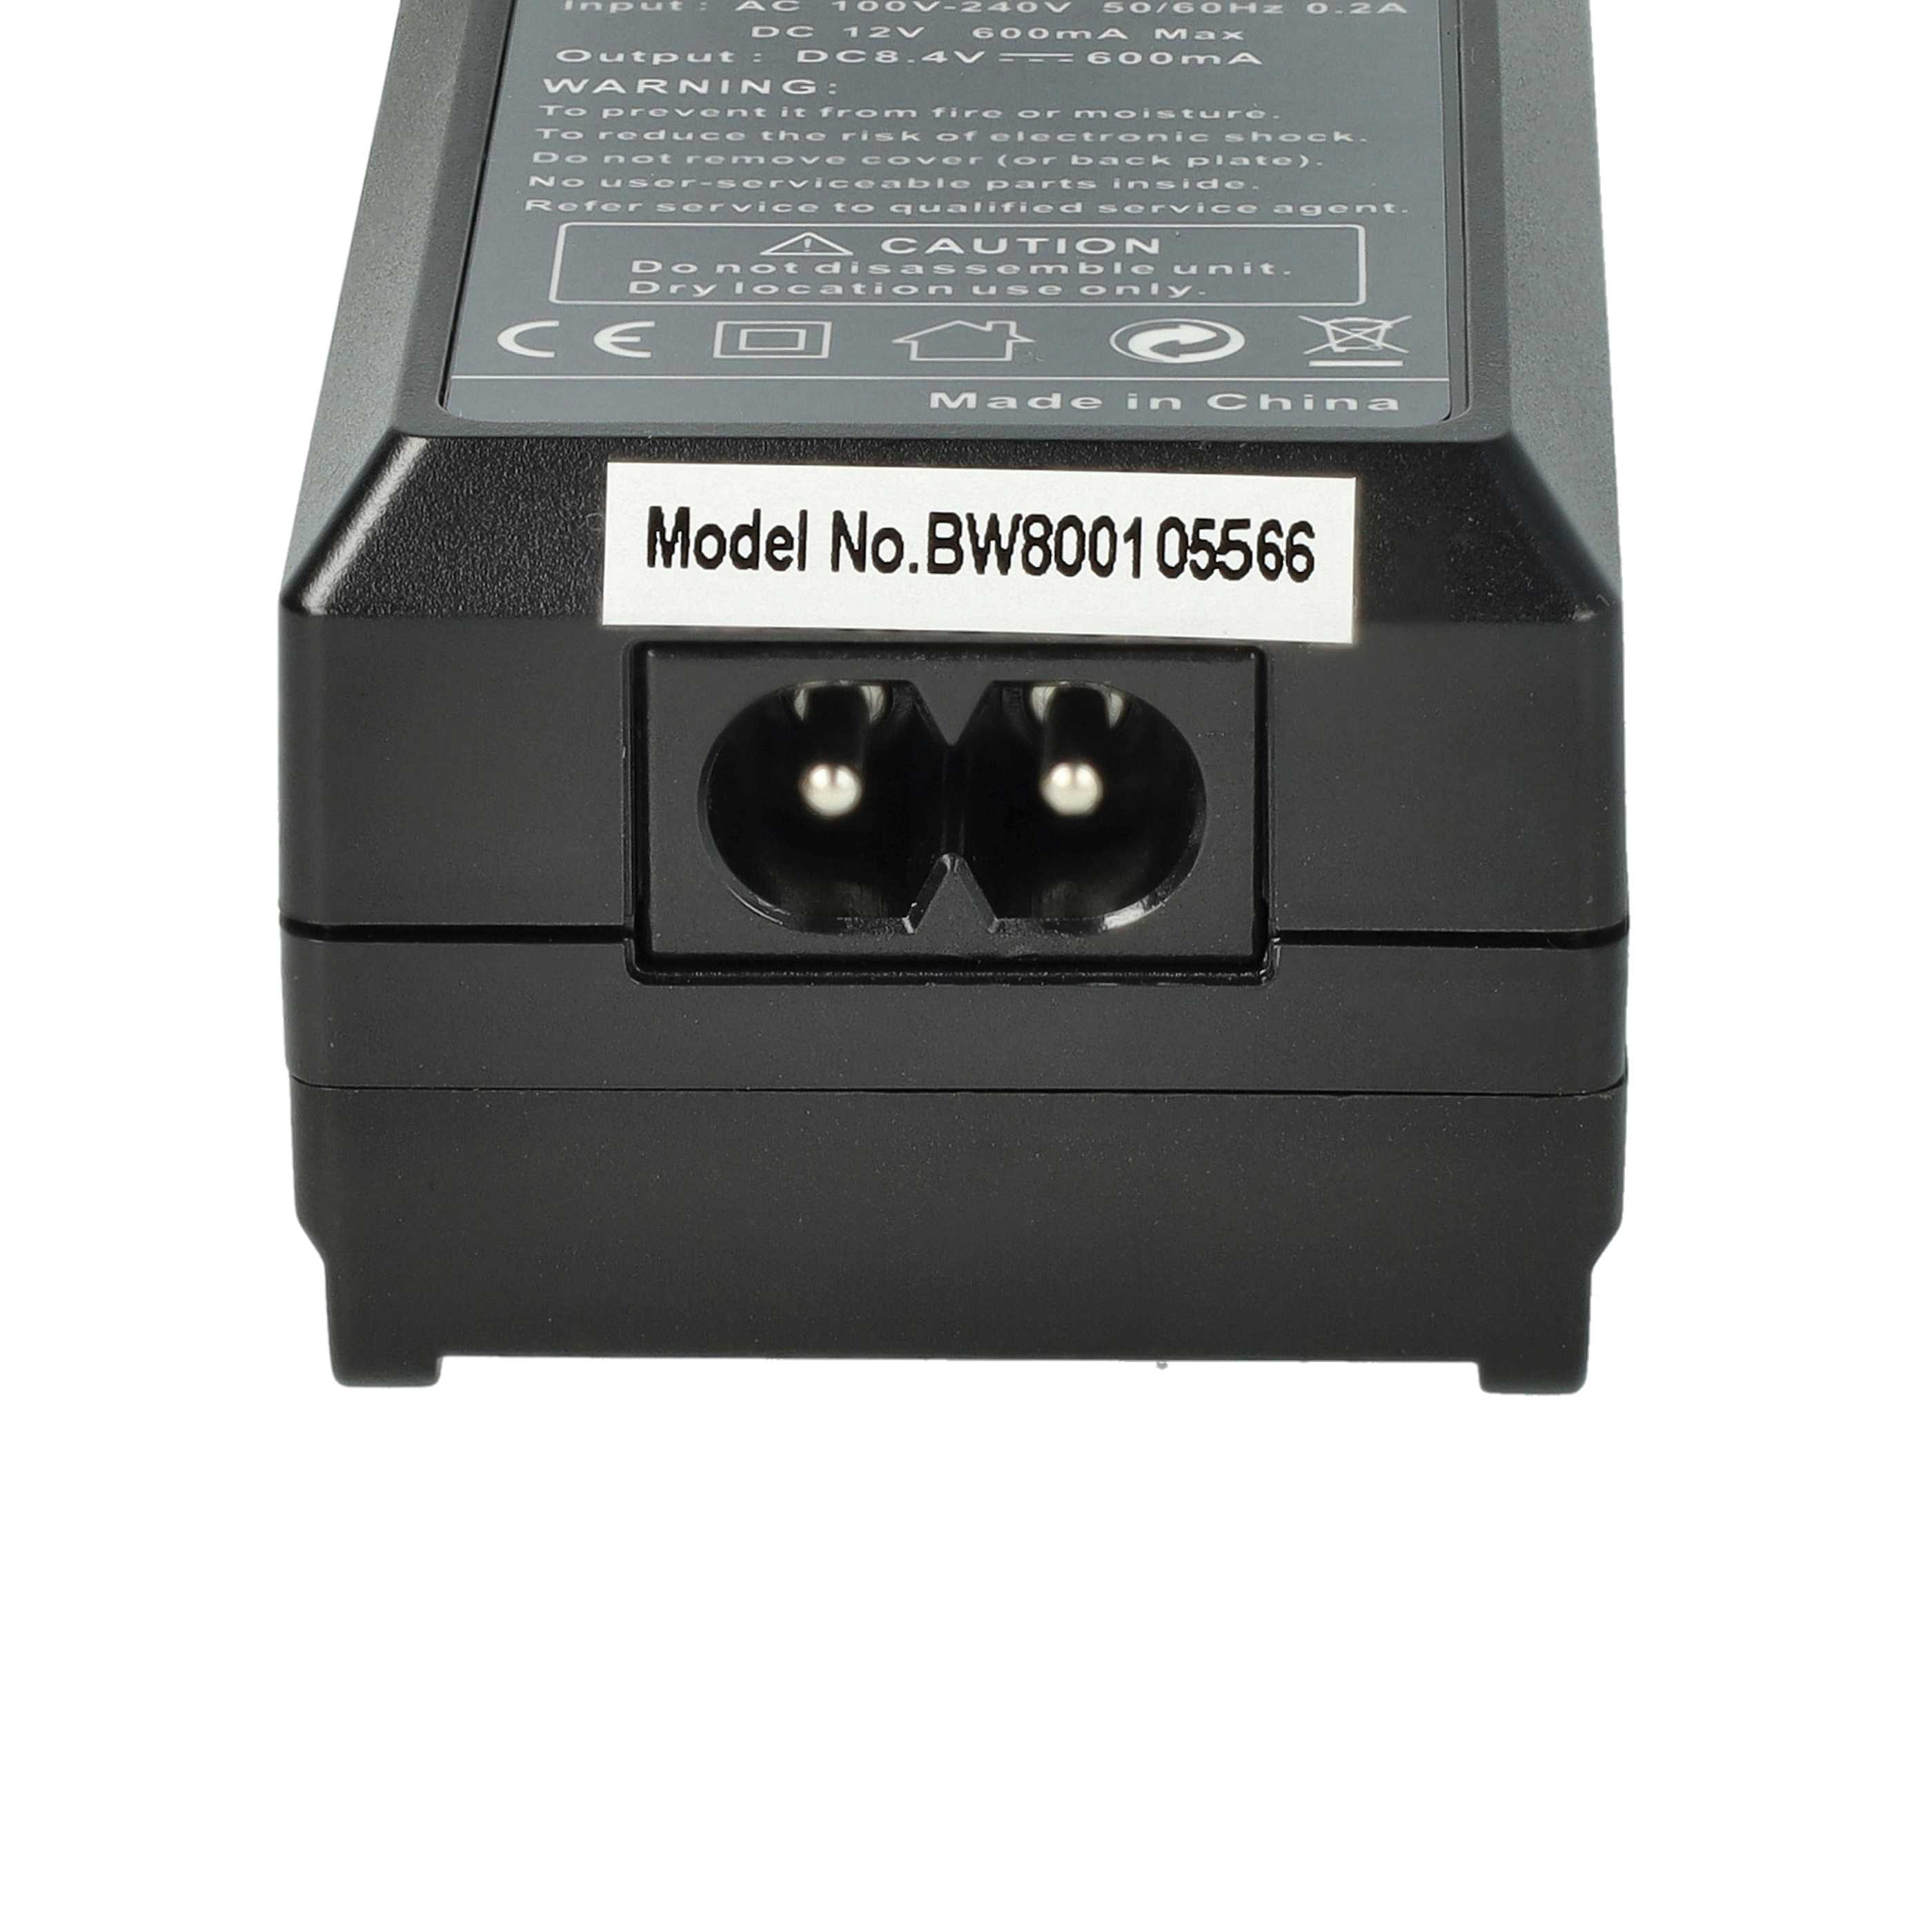 Battery Charger suitable for Lumix DMC-LX15 Camera etc. - 0.6 A, 8.4 V